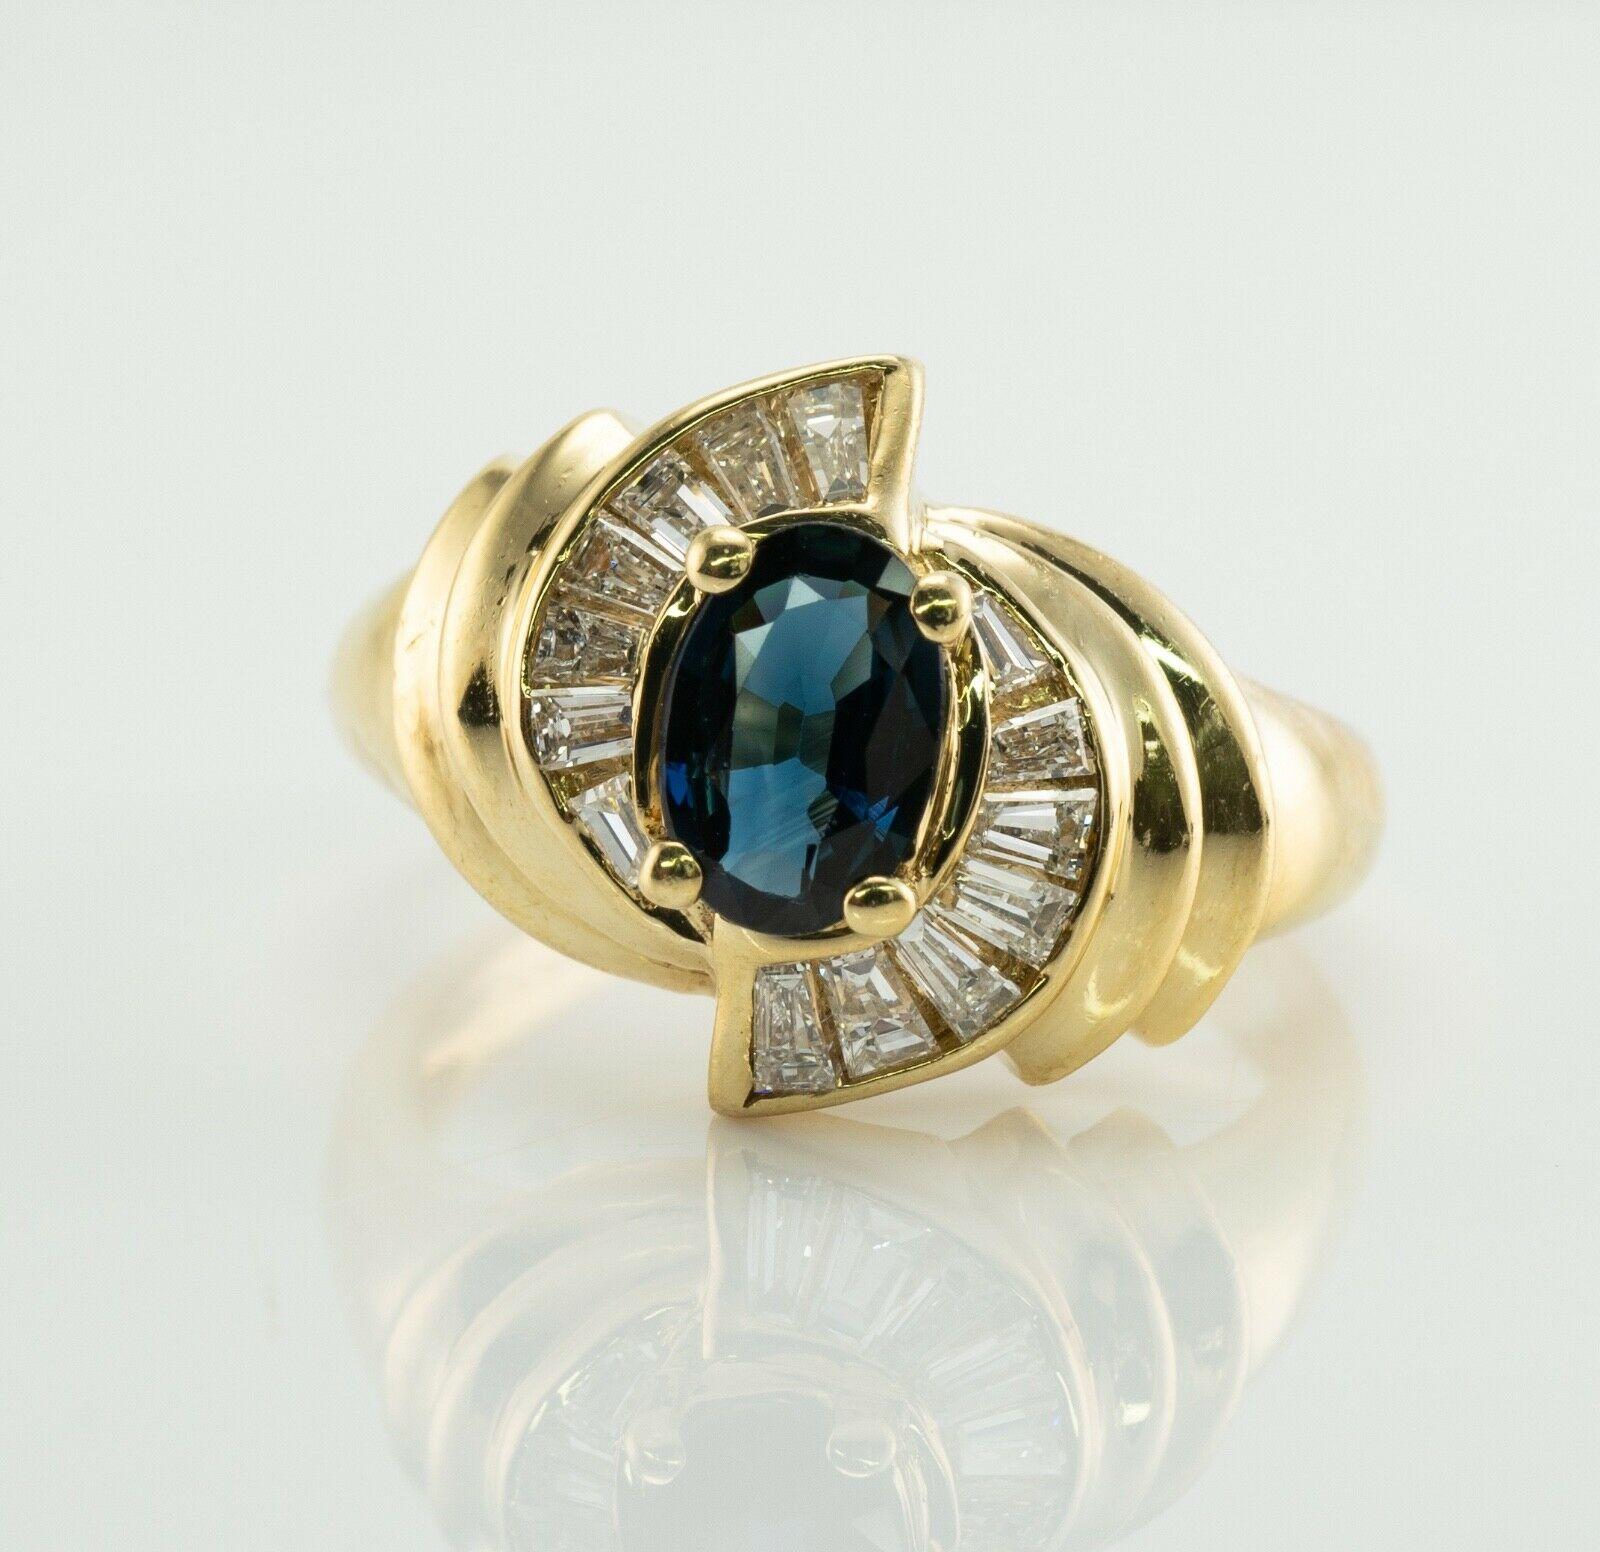 This estate ring is finely crafted in solid 14K Yellow gold and set with natural Earth mined Sapphires and Diamonds. 
The center oval cut blue Sapphire measures 7x5mm (1.00 carat). 
This is a clean gem of a great intensity.
The center stone is